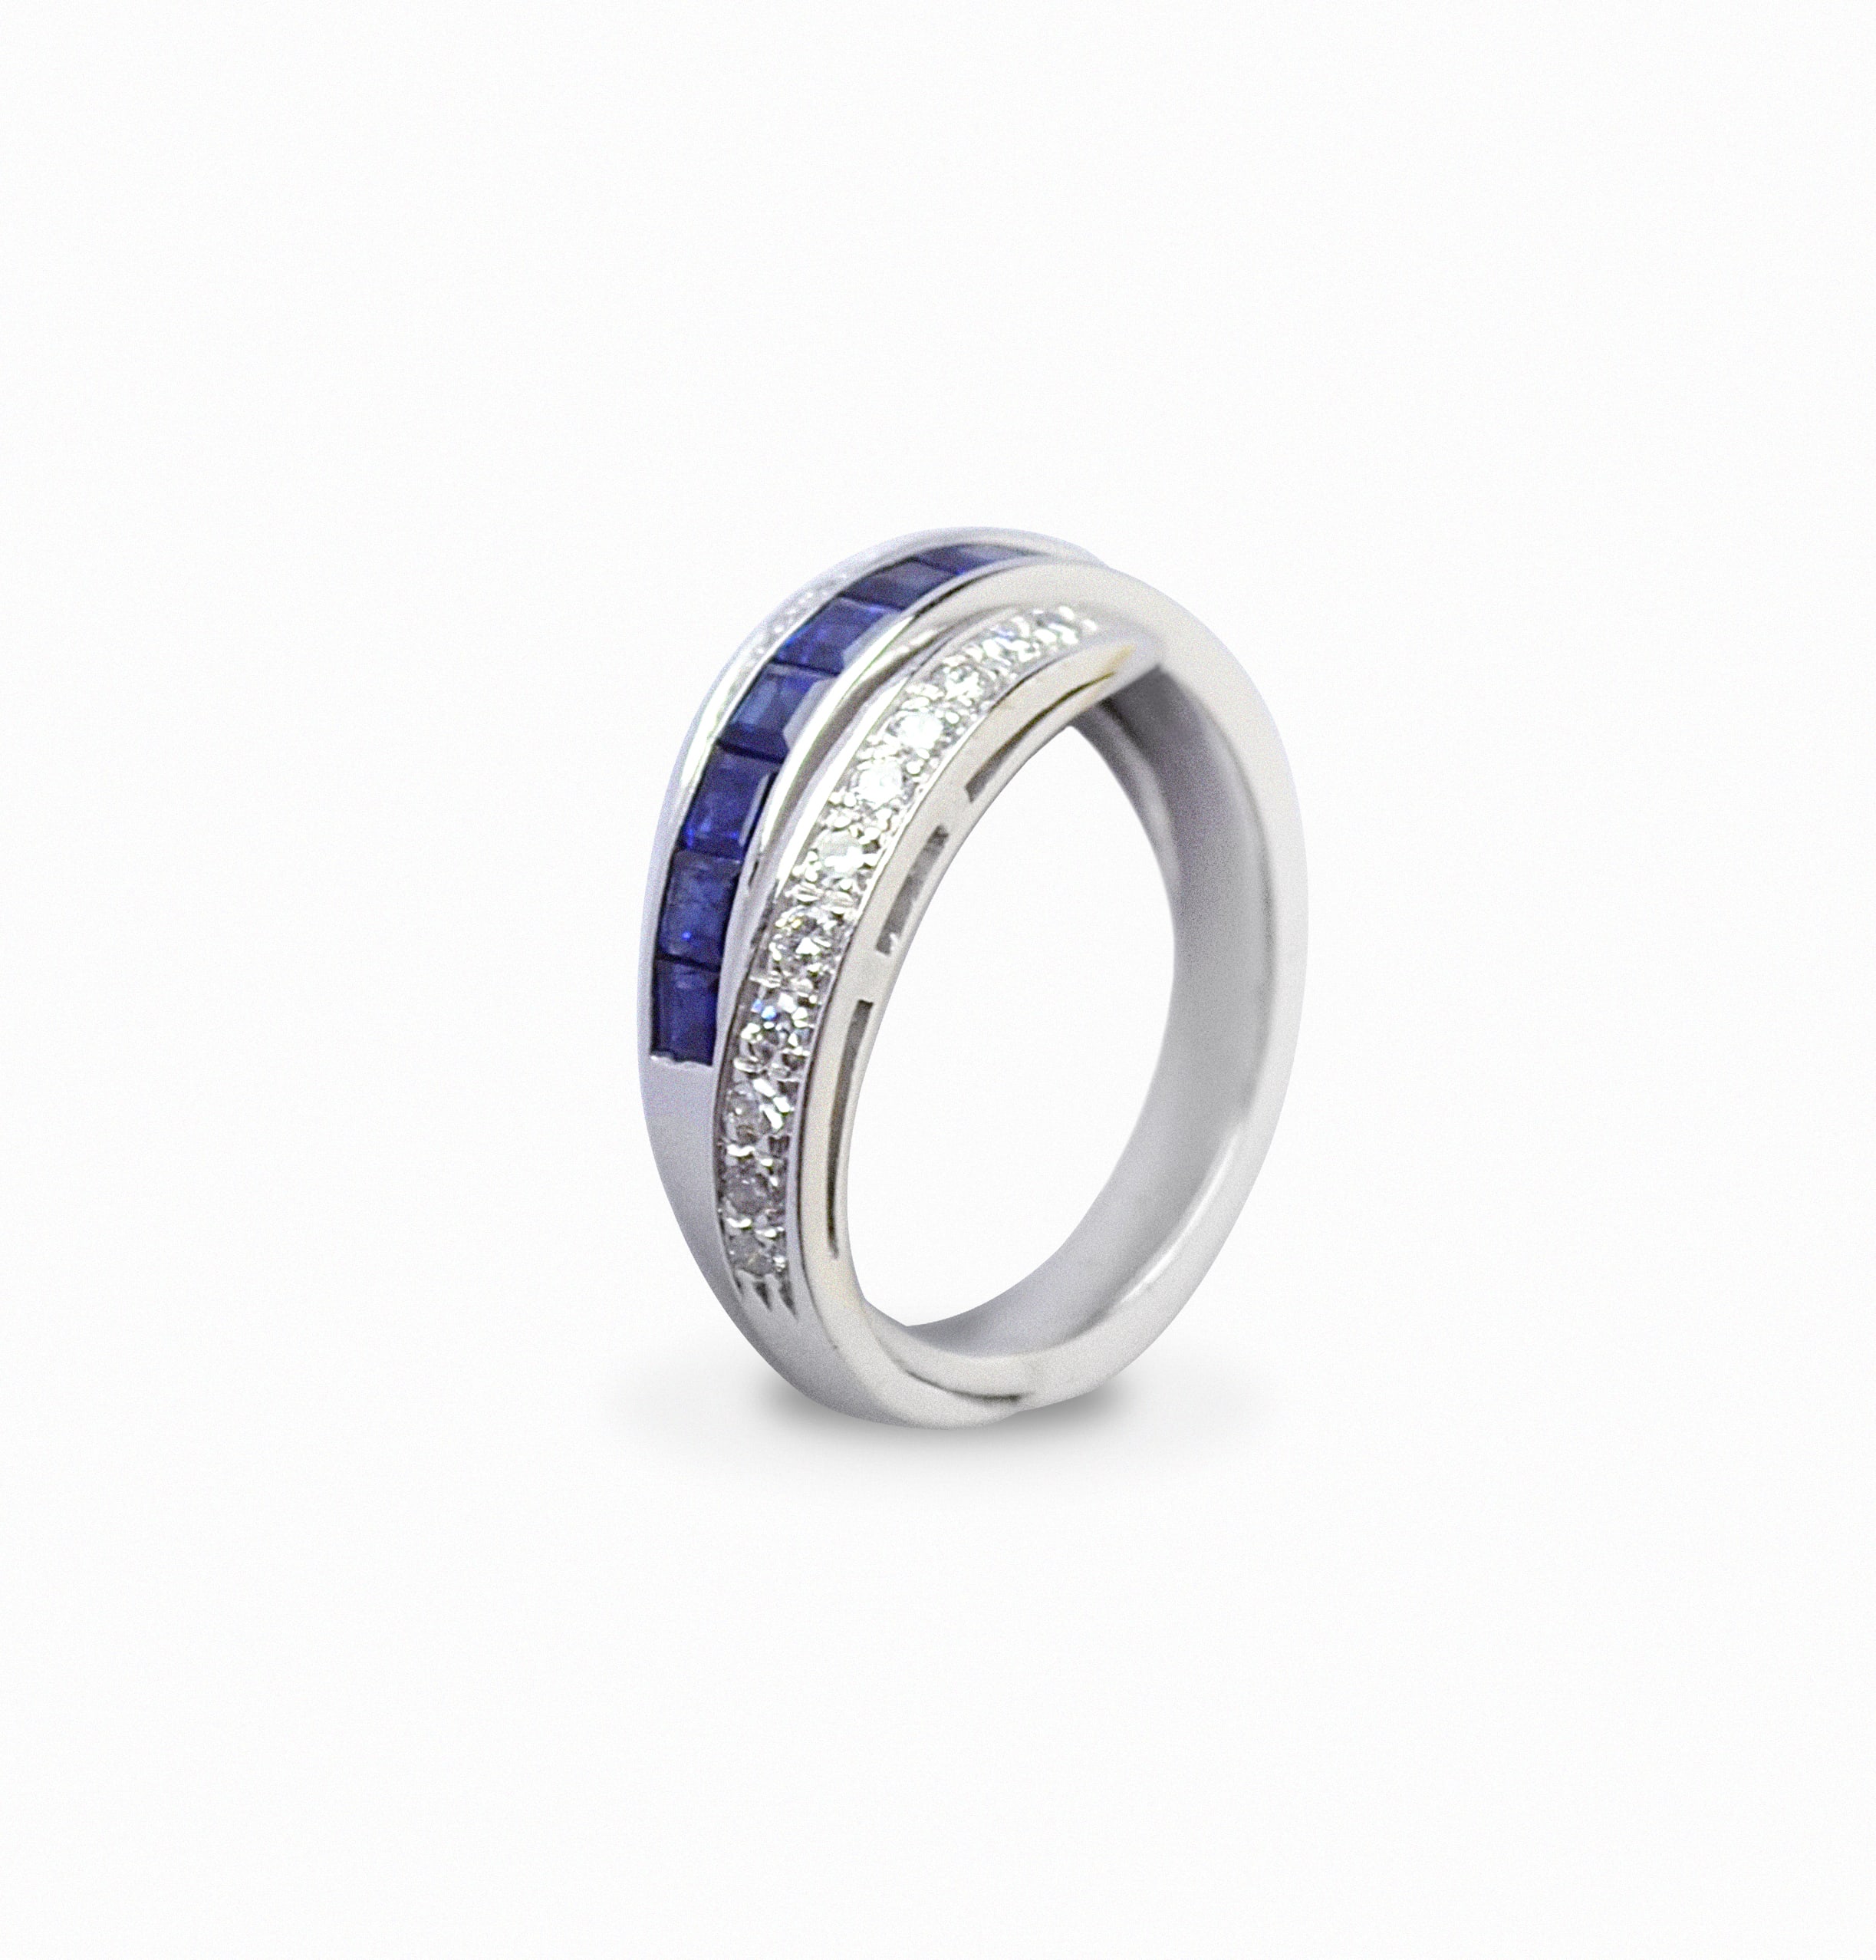 Real interweaving ring in Diamonds and Sapphires